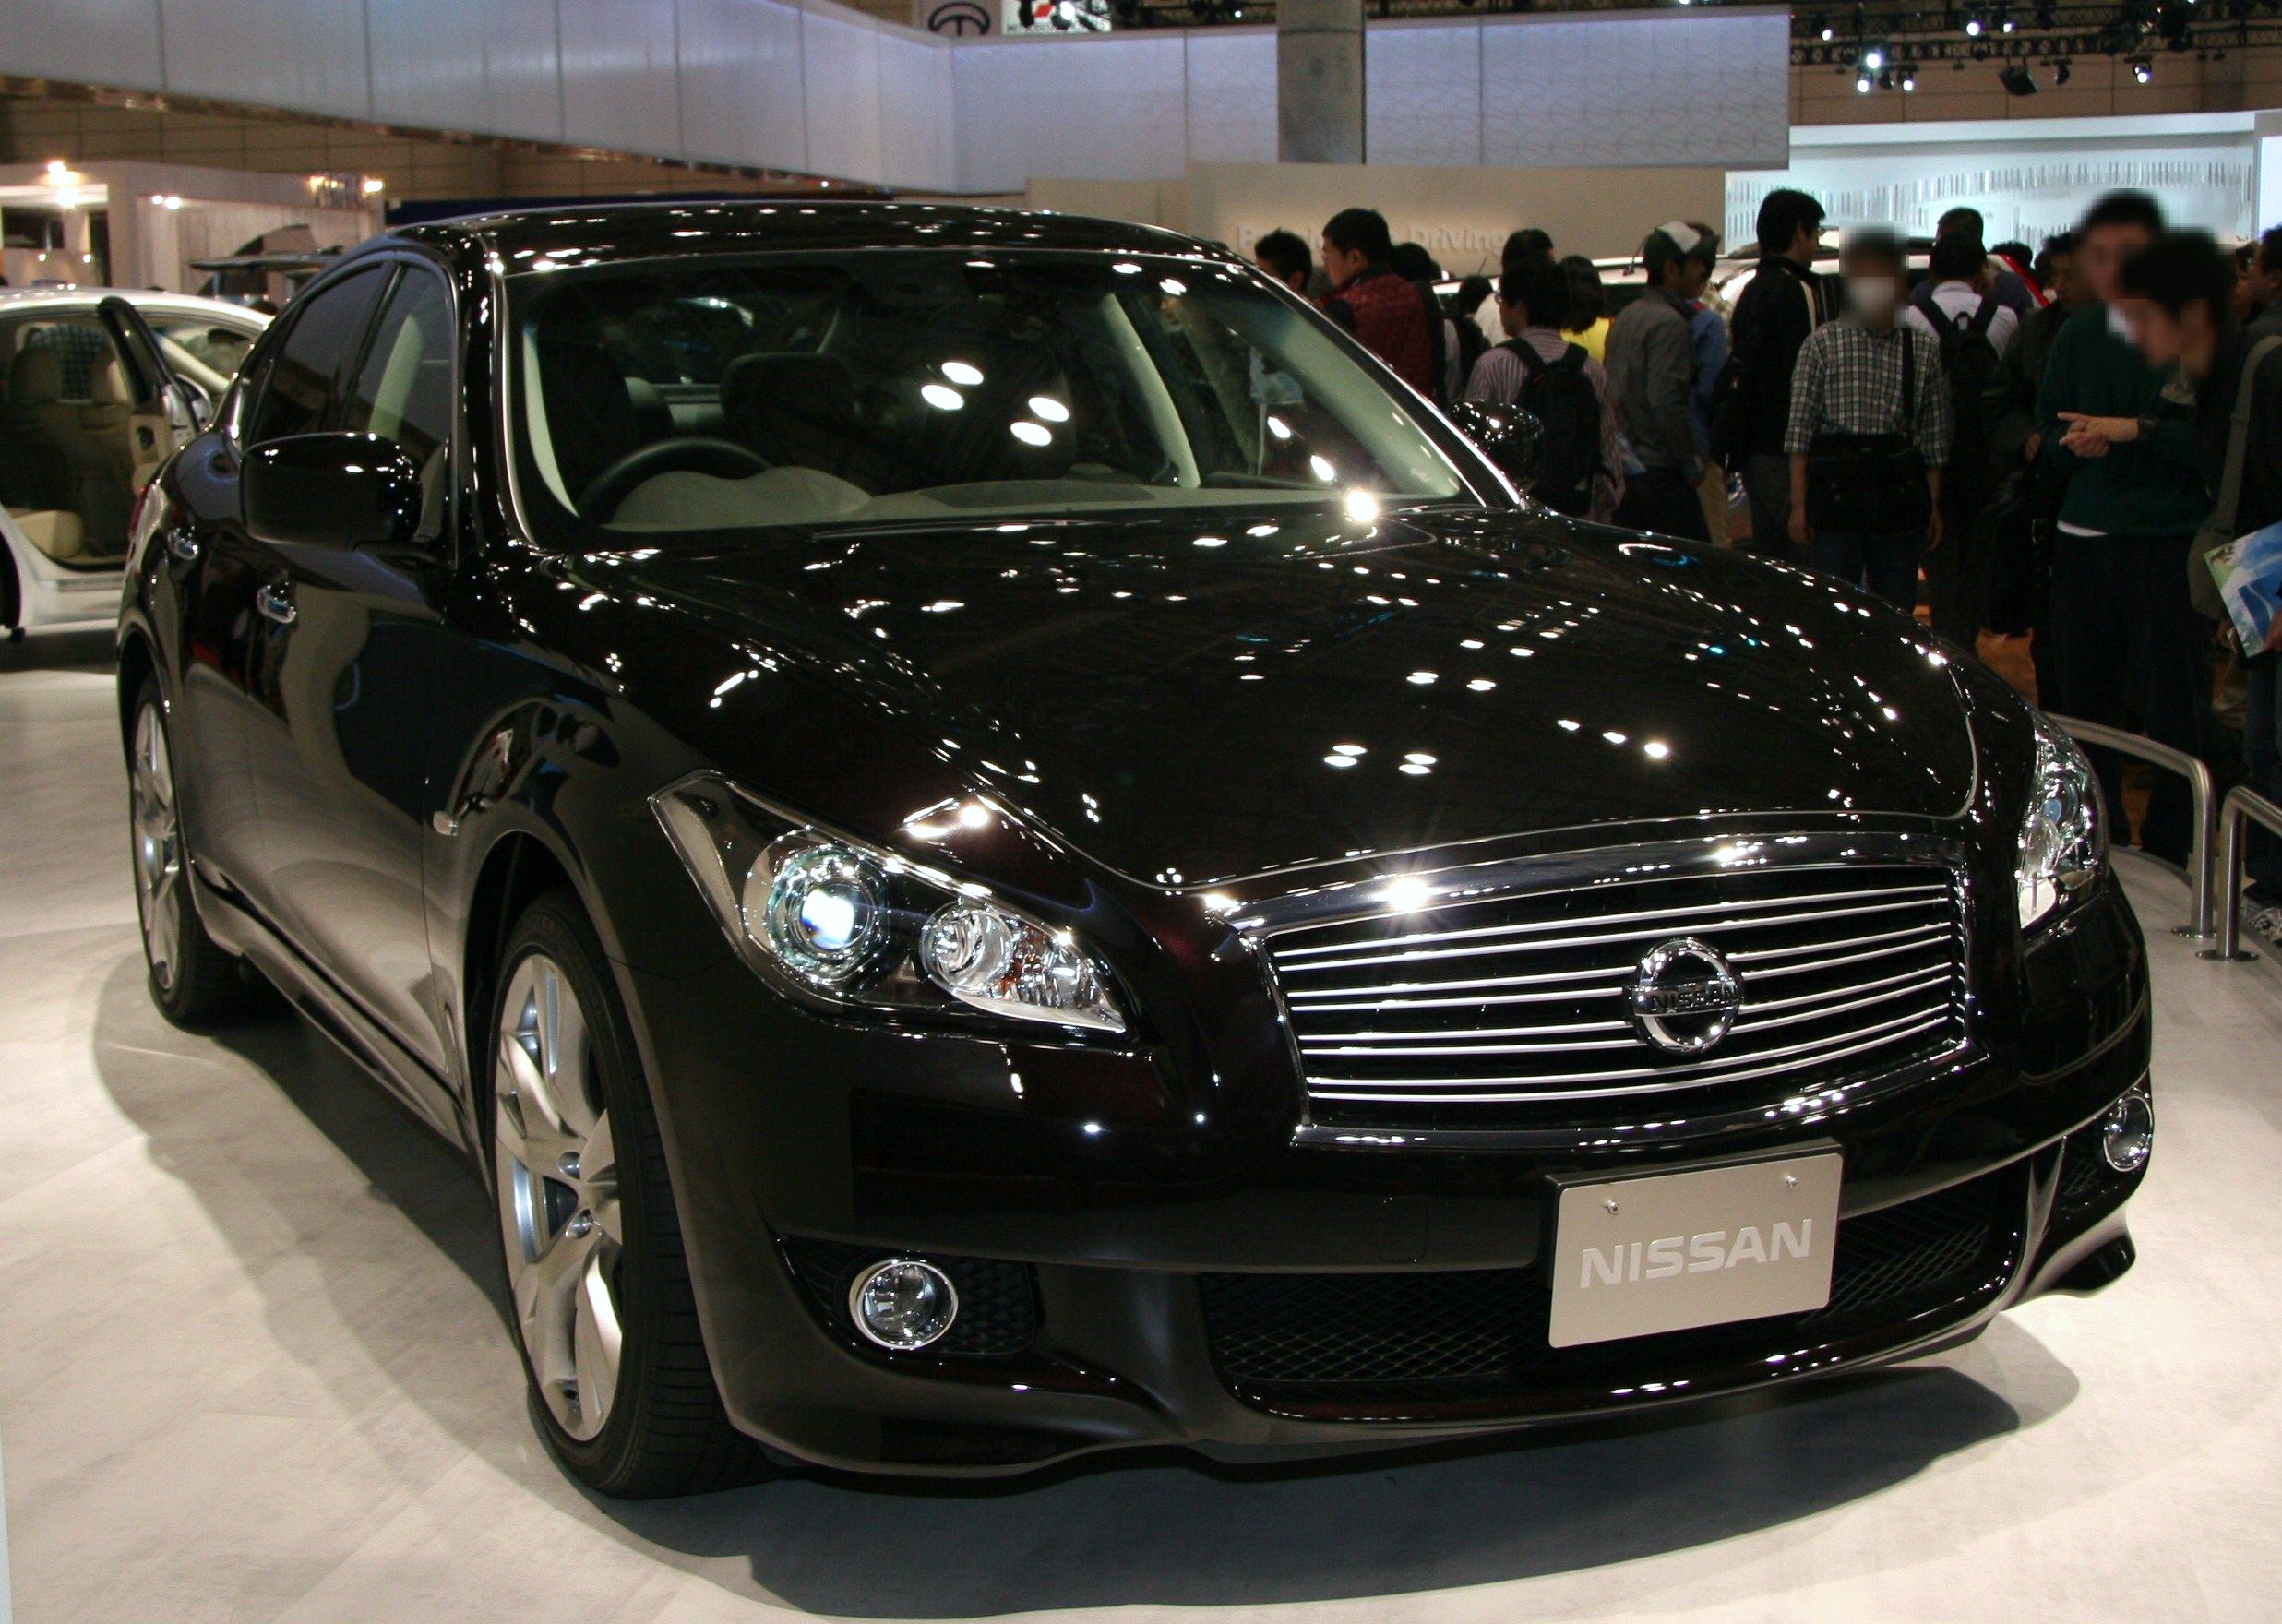 NISSAN FUGA 370GT Type S